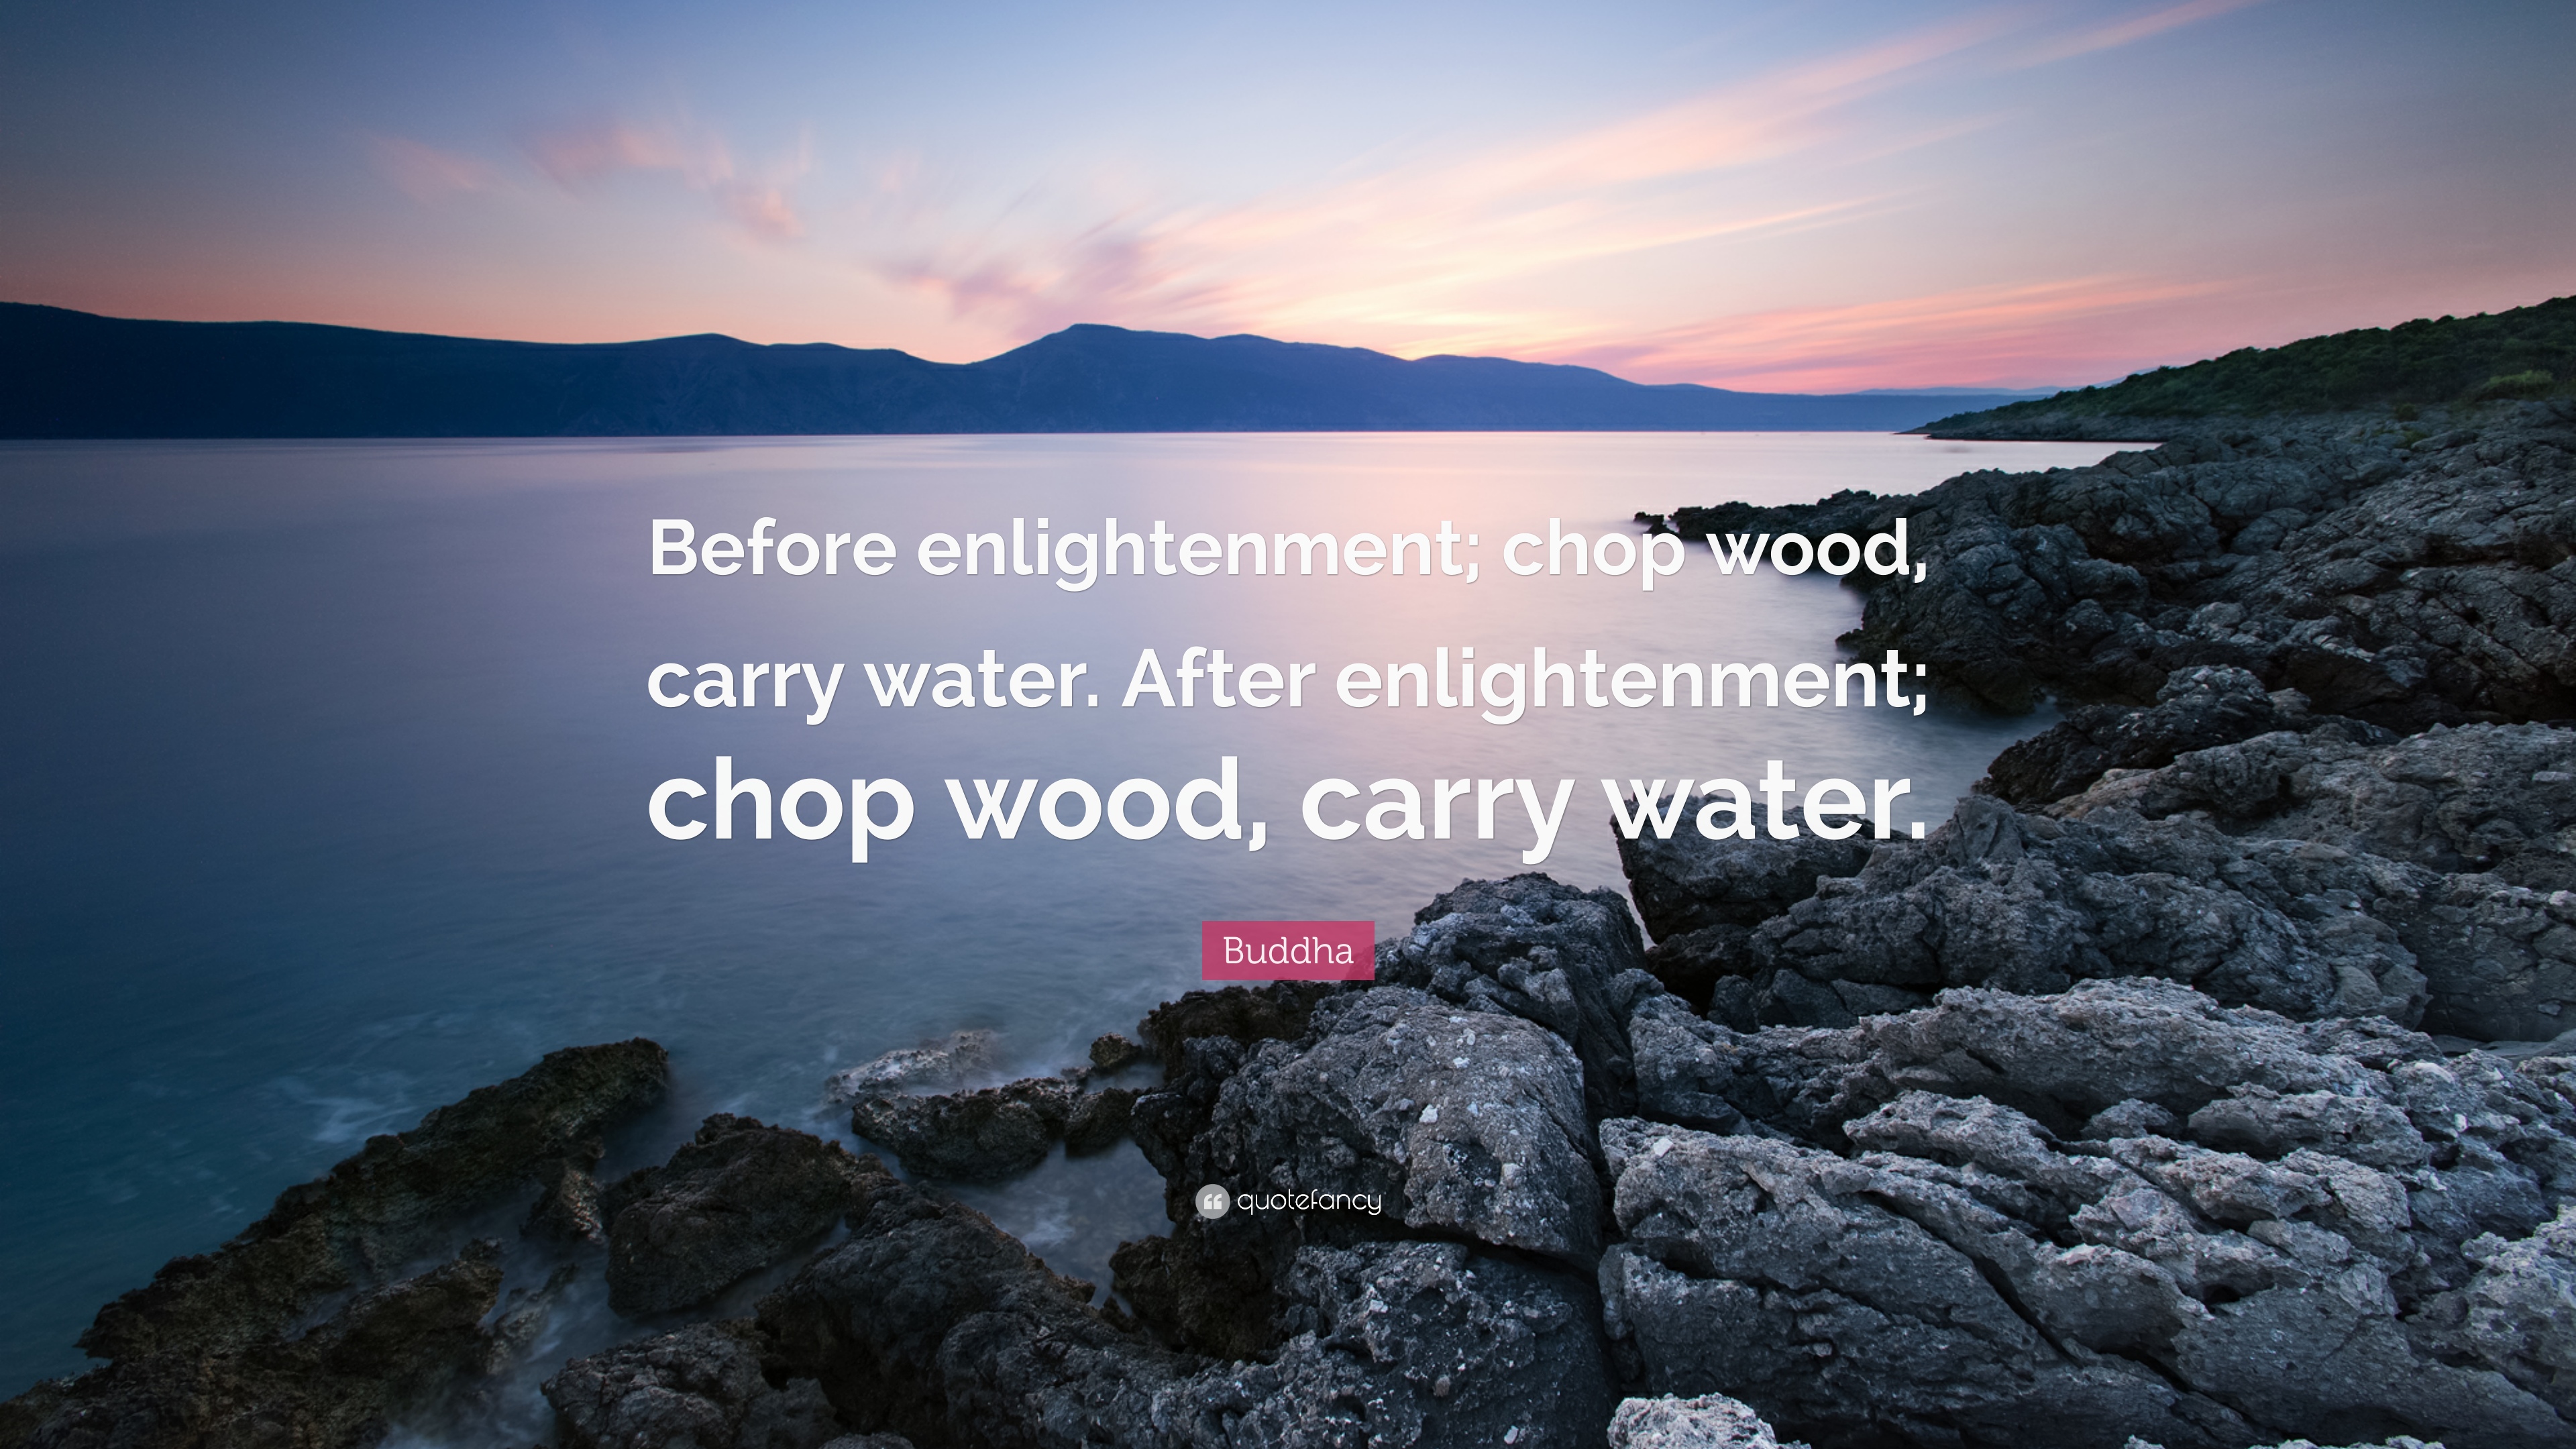 Buddha Quote: “Before enlightenment; chop wood, carry water